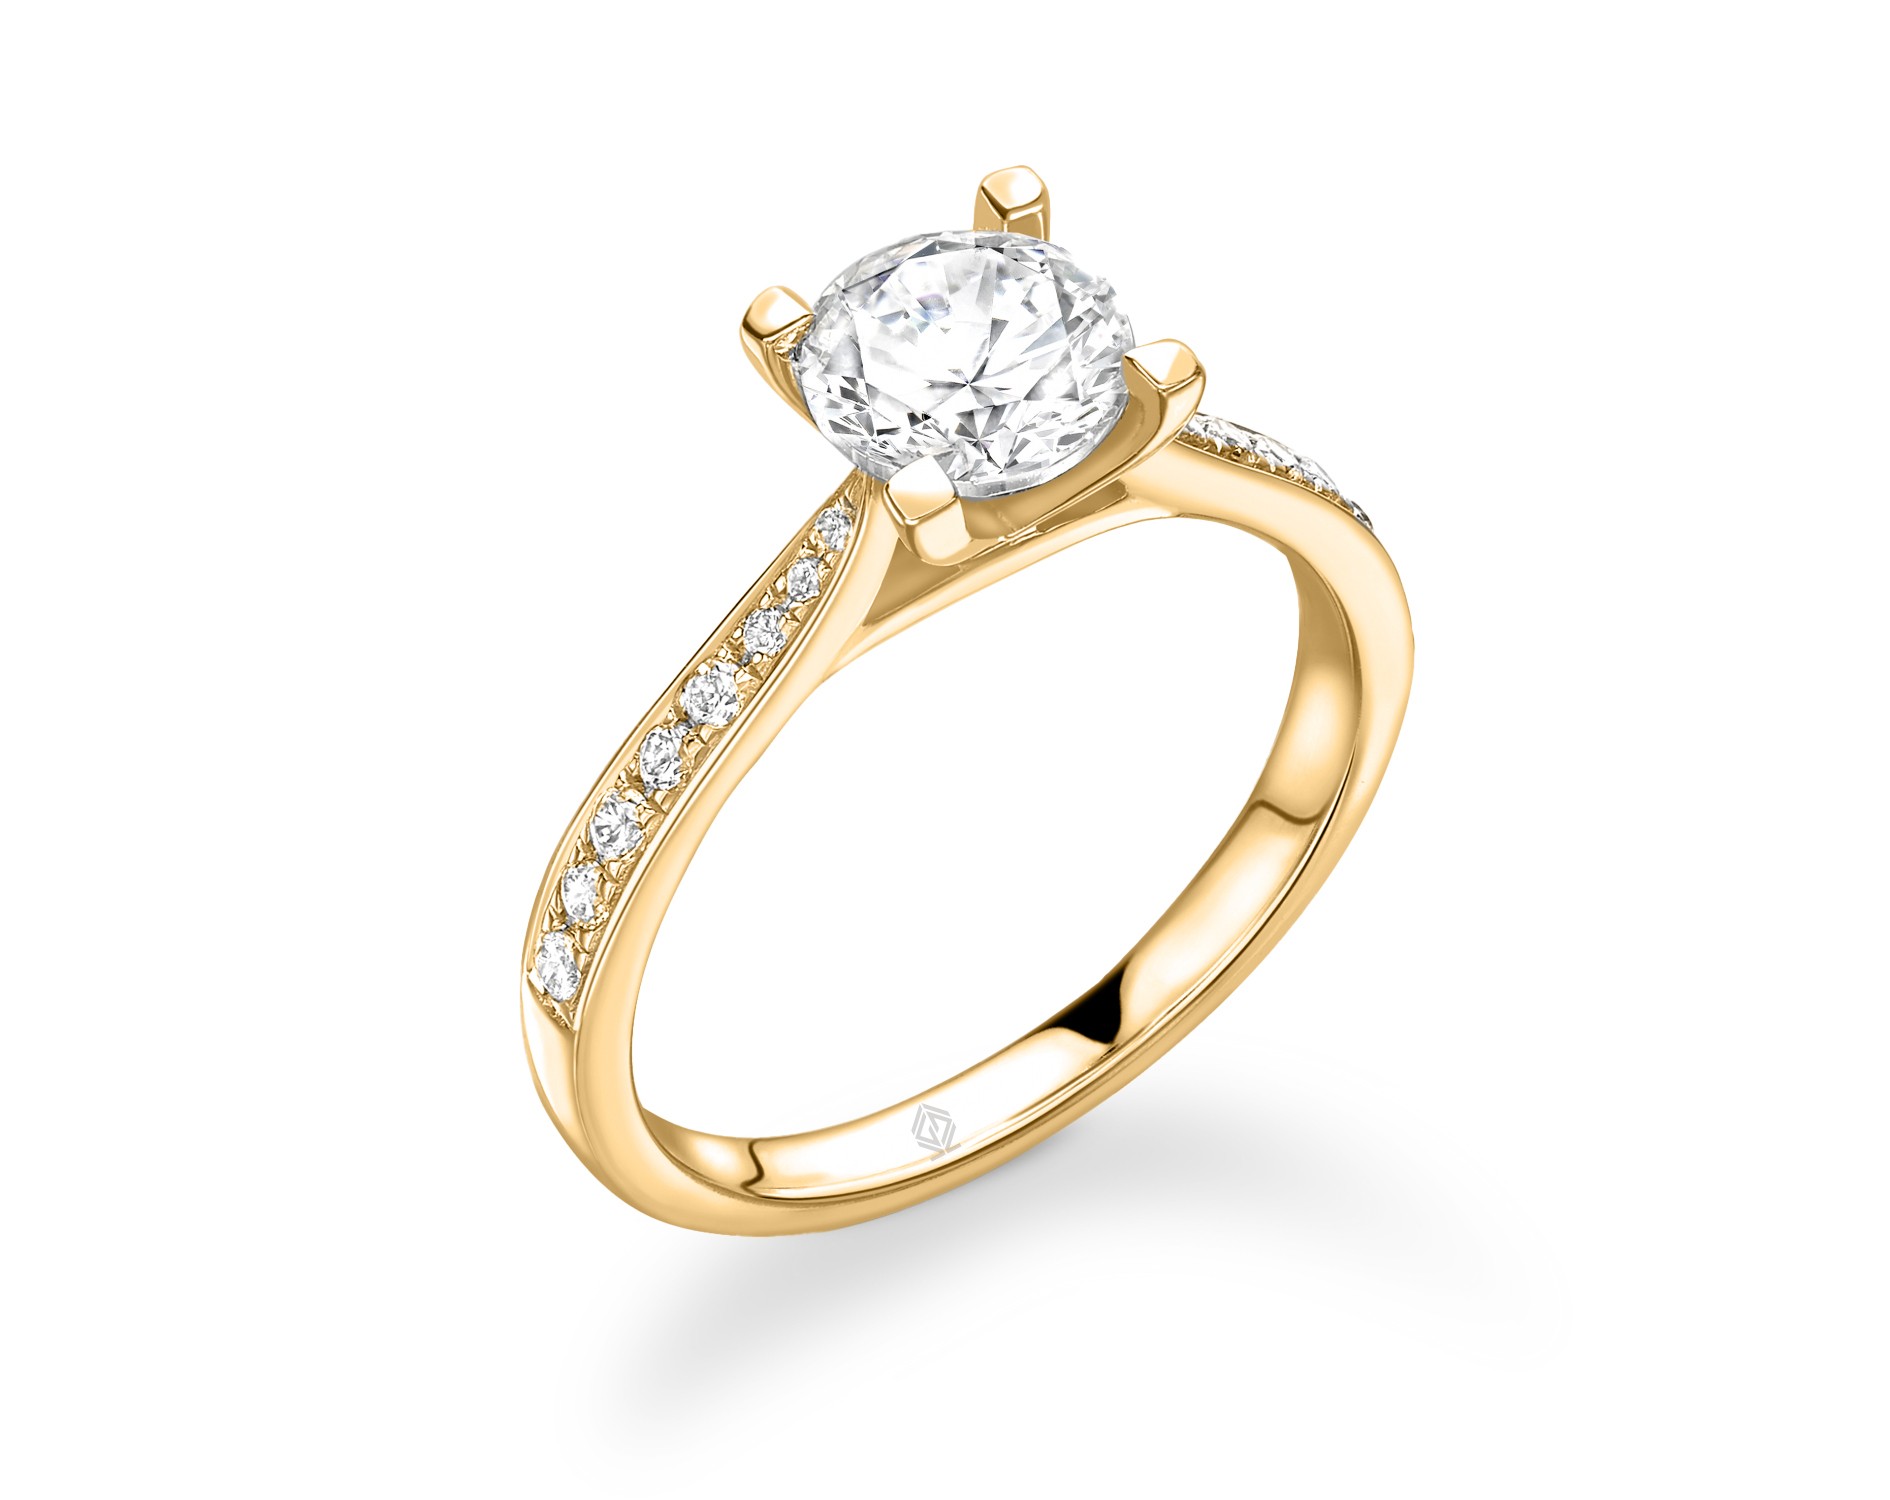 18K YELLOW GOLD ROUND CUT 4 PRONGS DIAMOND ENGAGEMENT RING WITH SIDE STONES CHANNEL SET